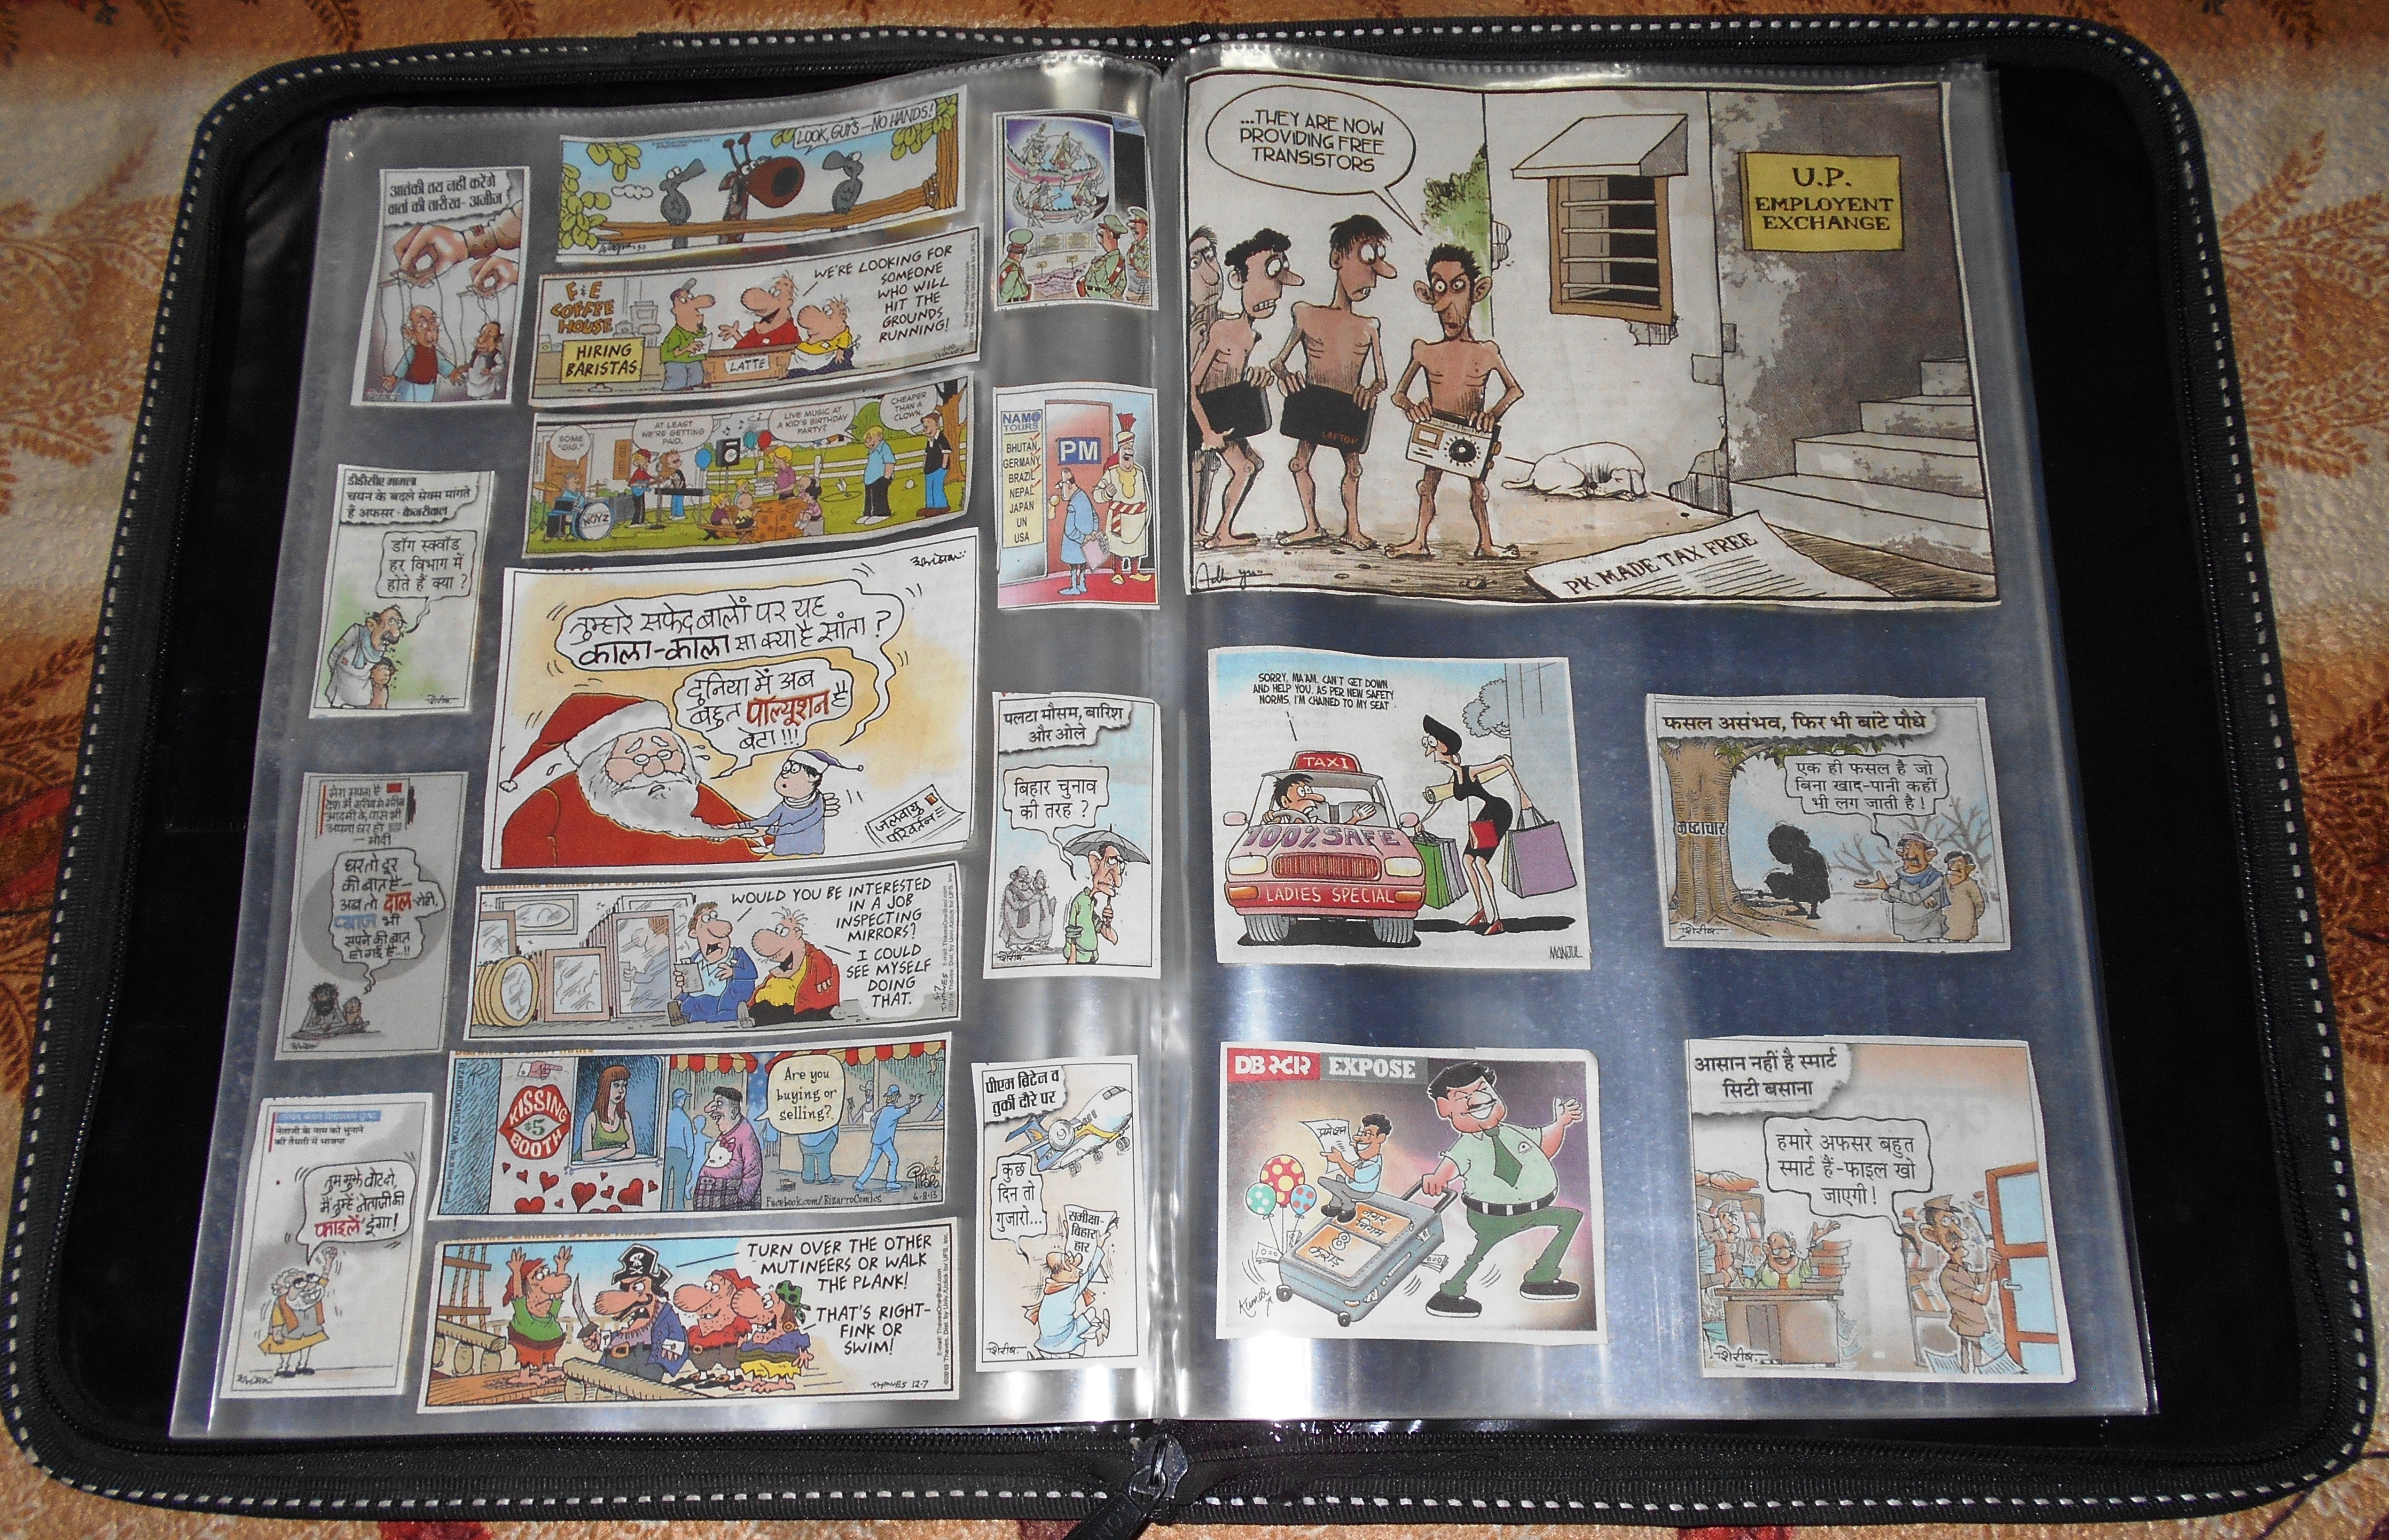 LARGEST COLLECTION OF NEWSPAPER CARTOON CLIPS